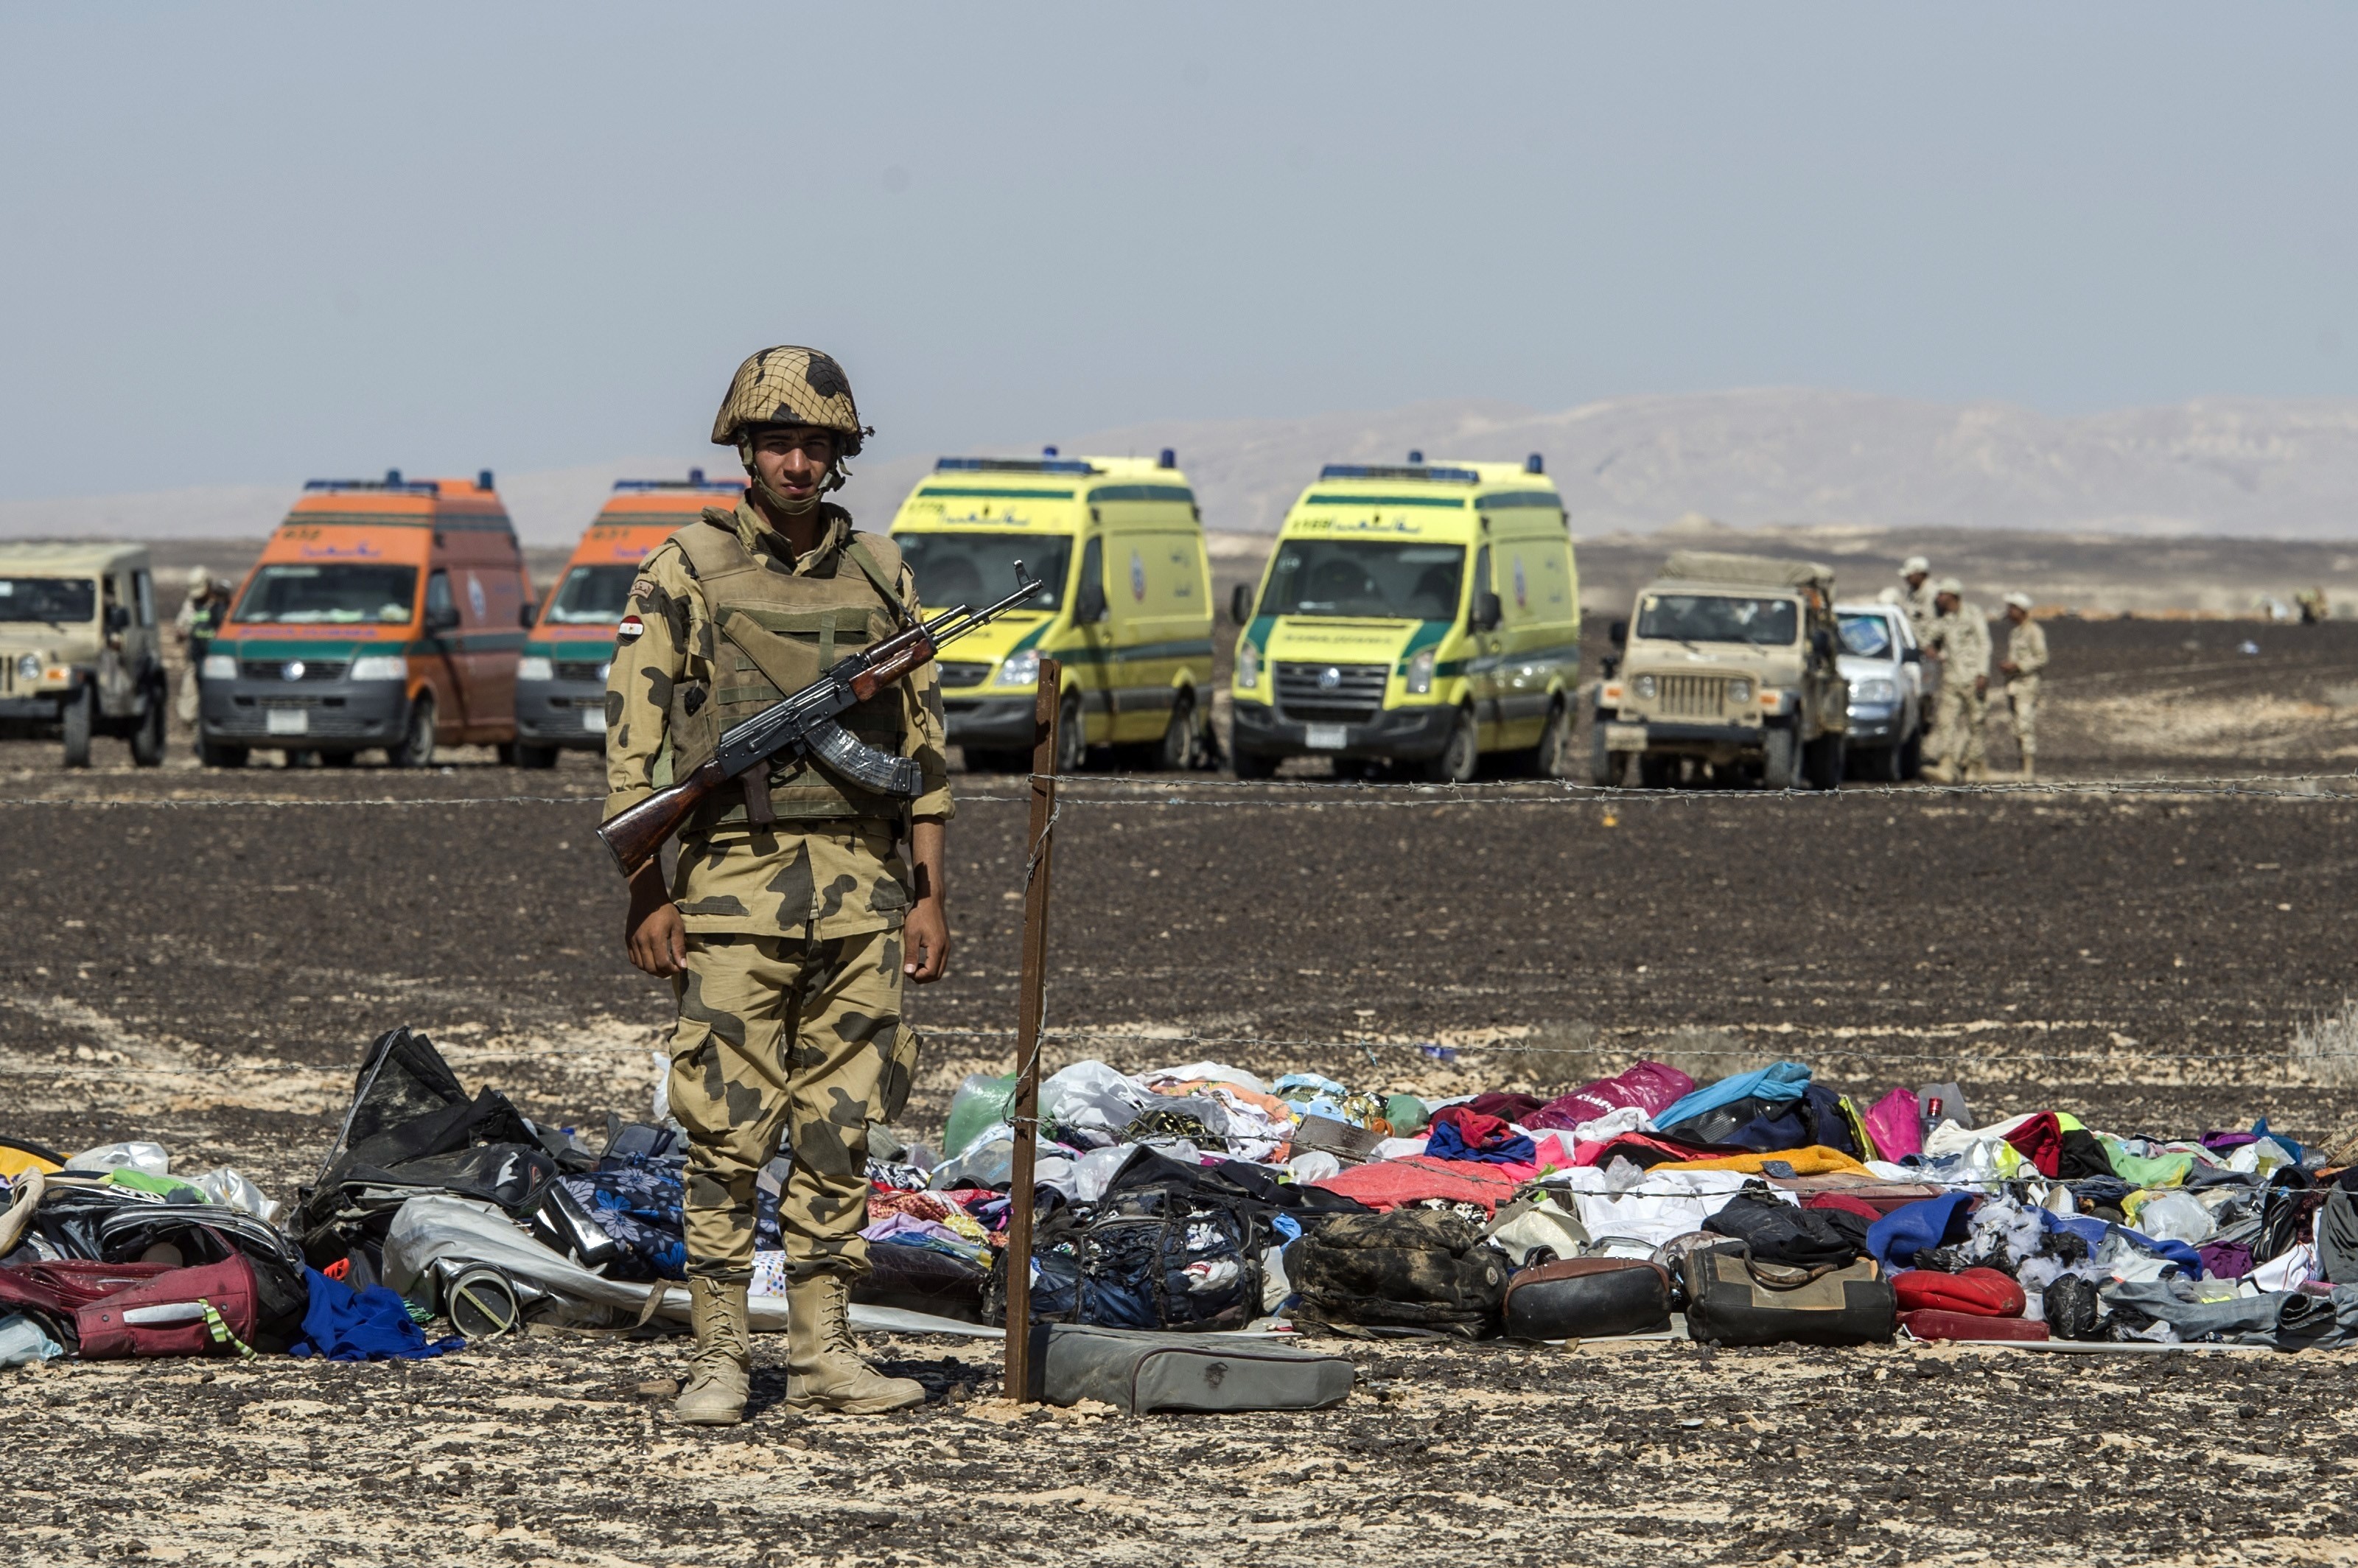 An Egyptian army soldier stands guard next to the luggage and belongings of passengers of the A321 Russian airliner piled up at the site of the crash in Wadi al-Zolomat, a mountainous area in Egypt's Sinai Peninsula on November 1, 2015.(KHALED DESOUKI/AFP/Getty Images)